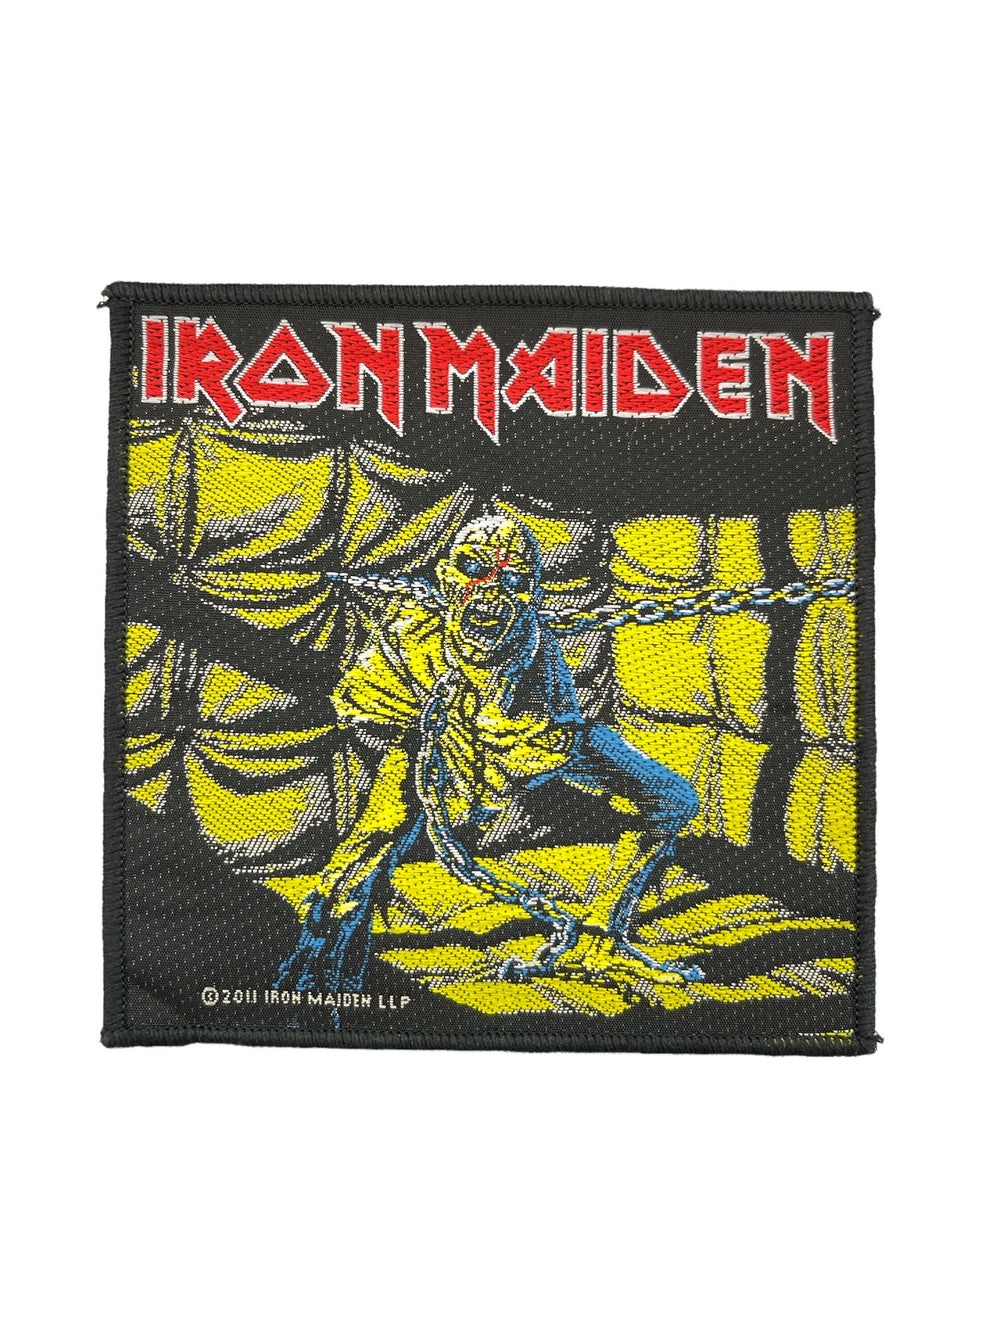 Iron Maiden Piece Of Mind Official Woven Patch Brand New